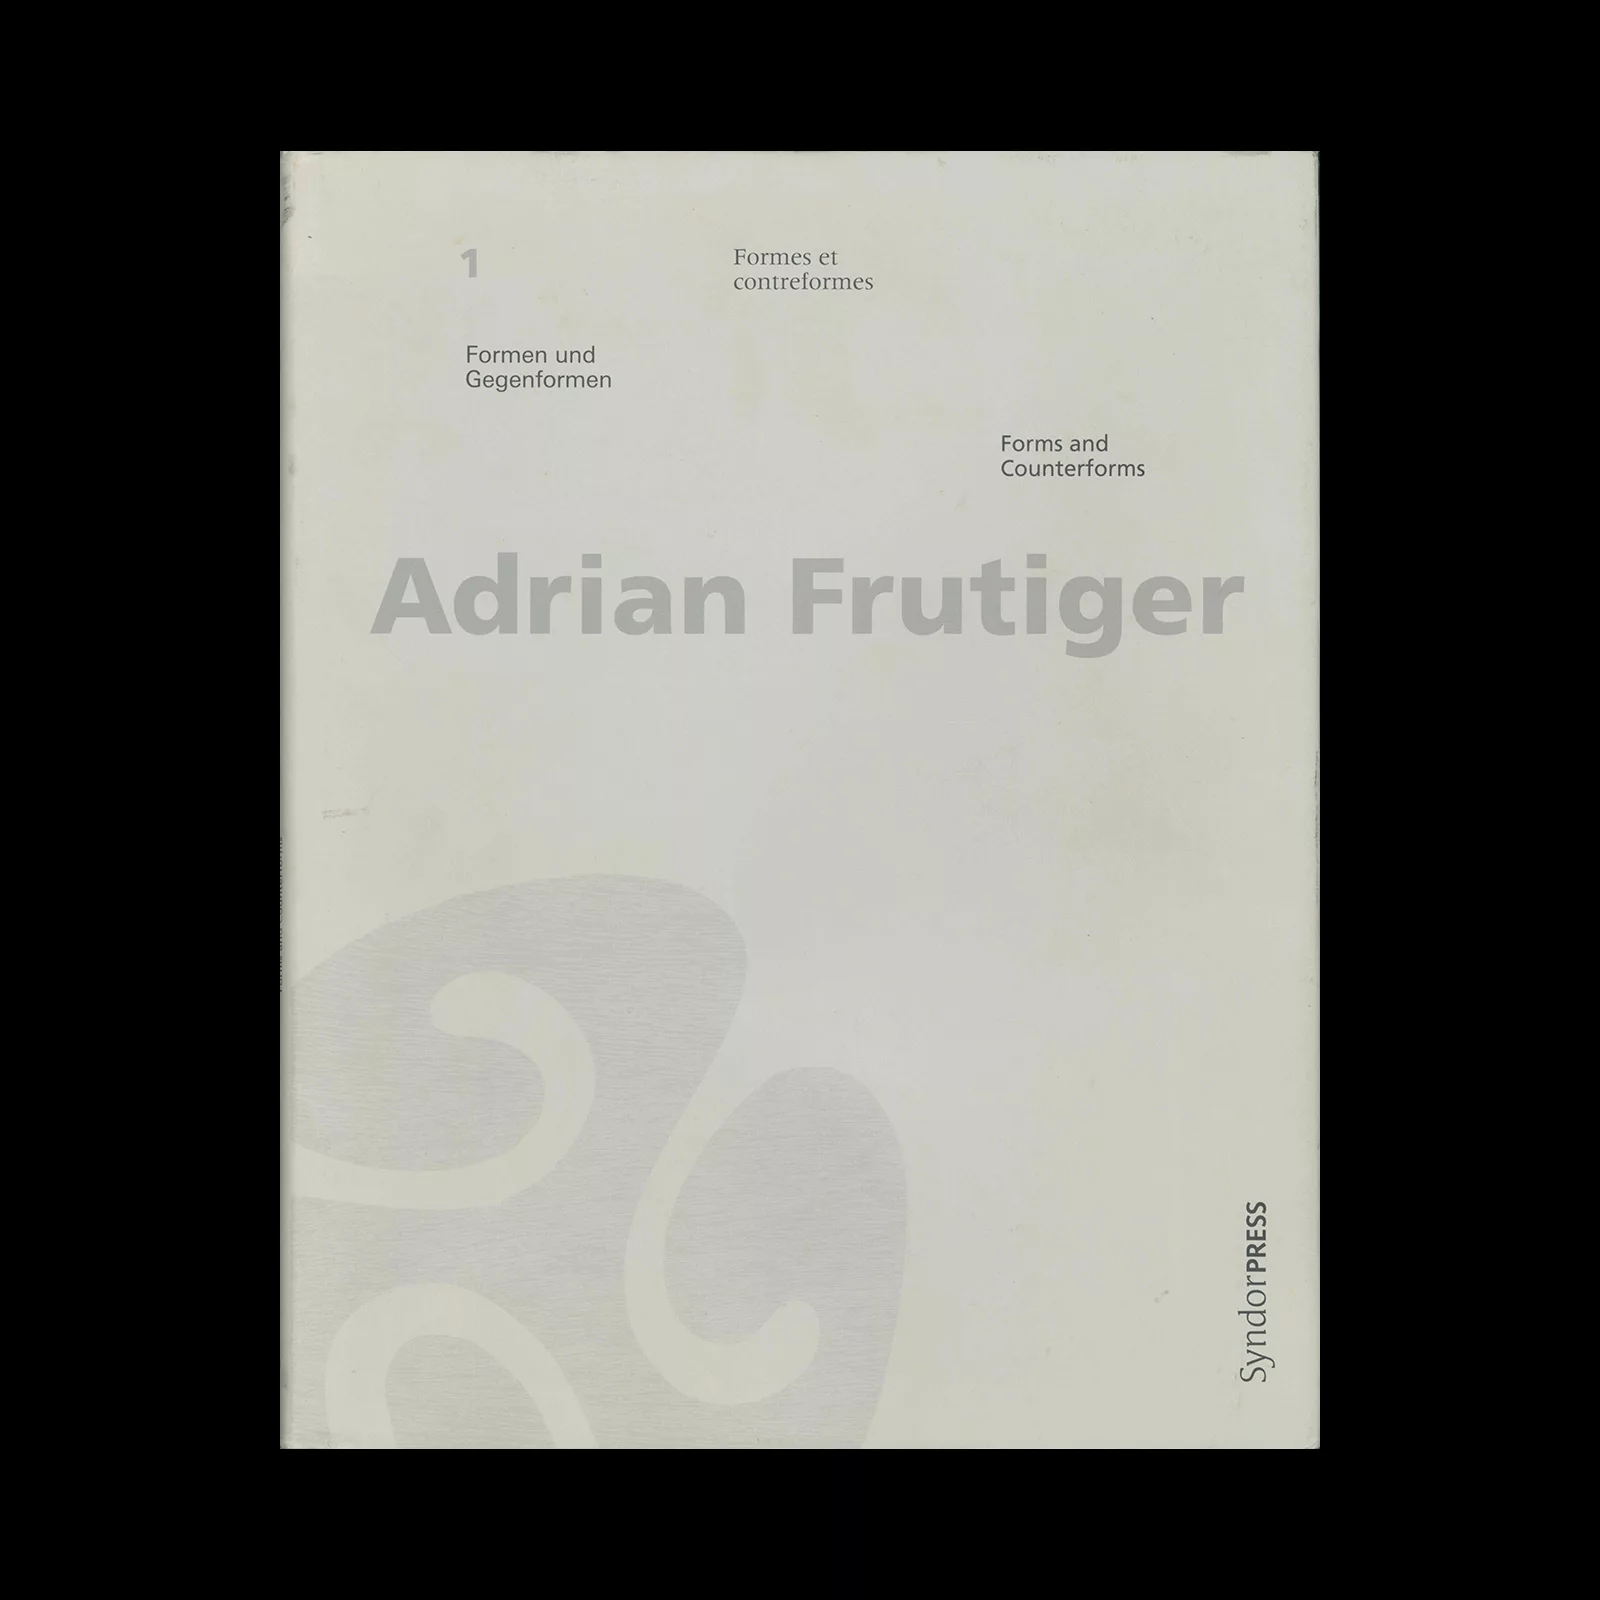 Adrian Frutiger, Forms and counterforms, 1999